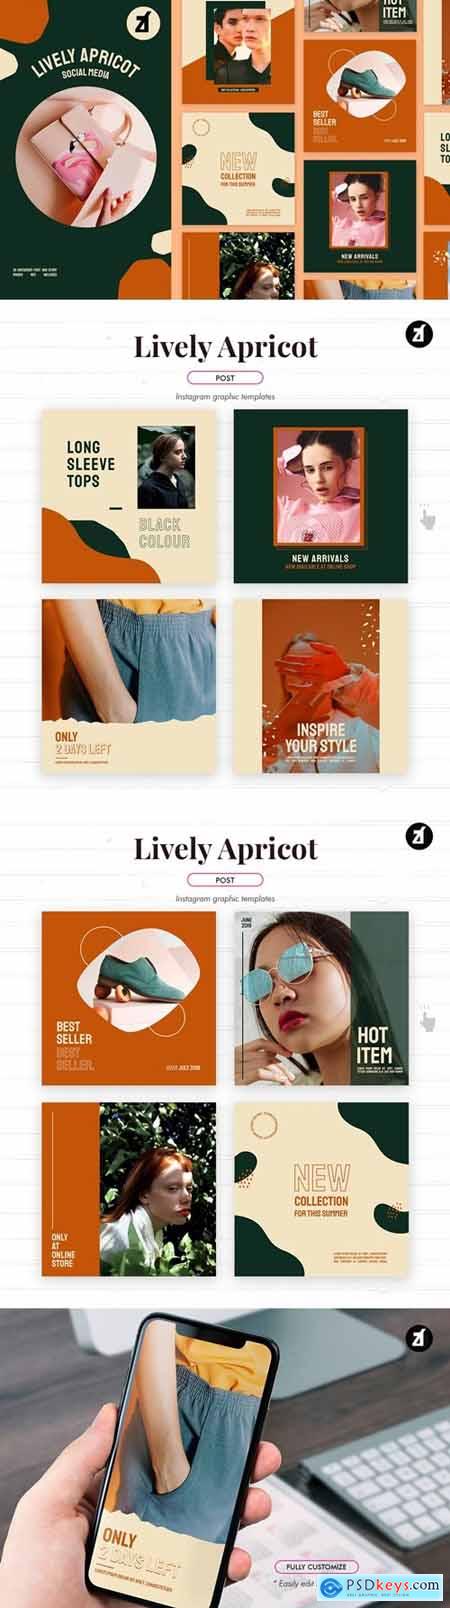 Lively apricot social media graphic templates